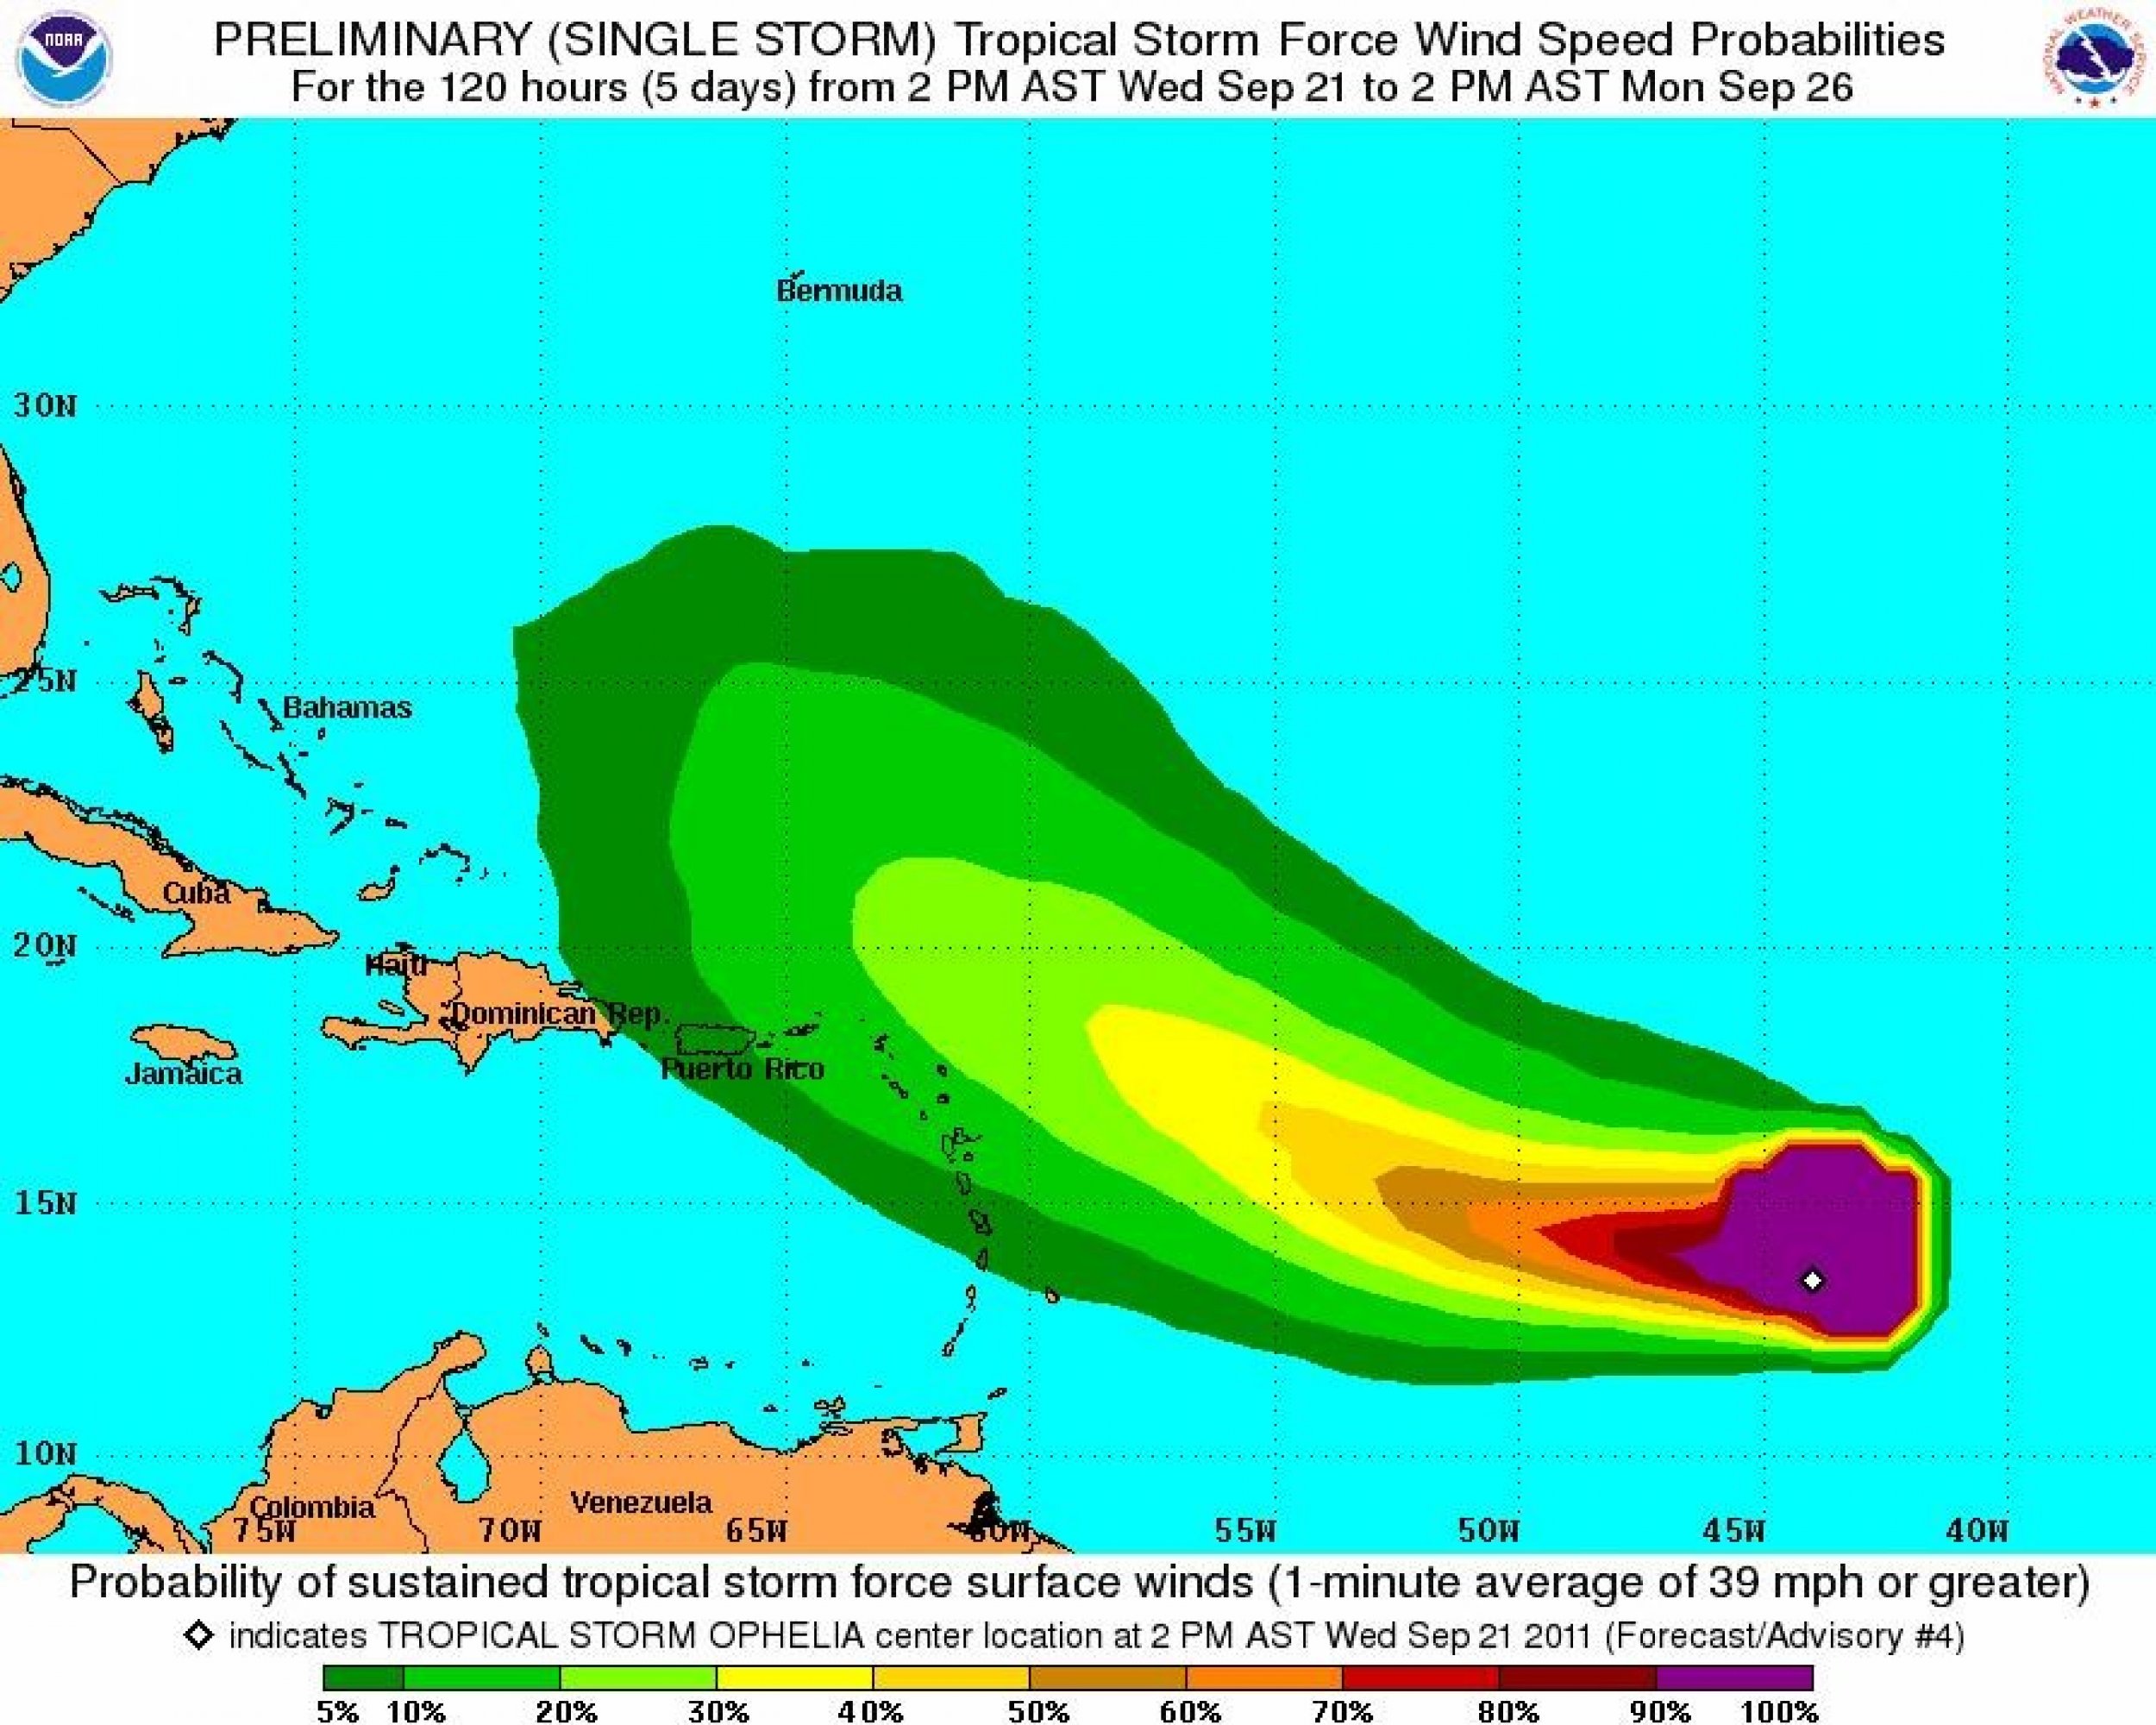 Tropical Storm Ophelia Projected Path Changes Slightly IBTimes